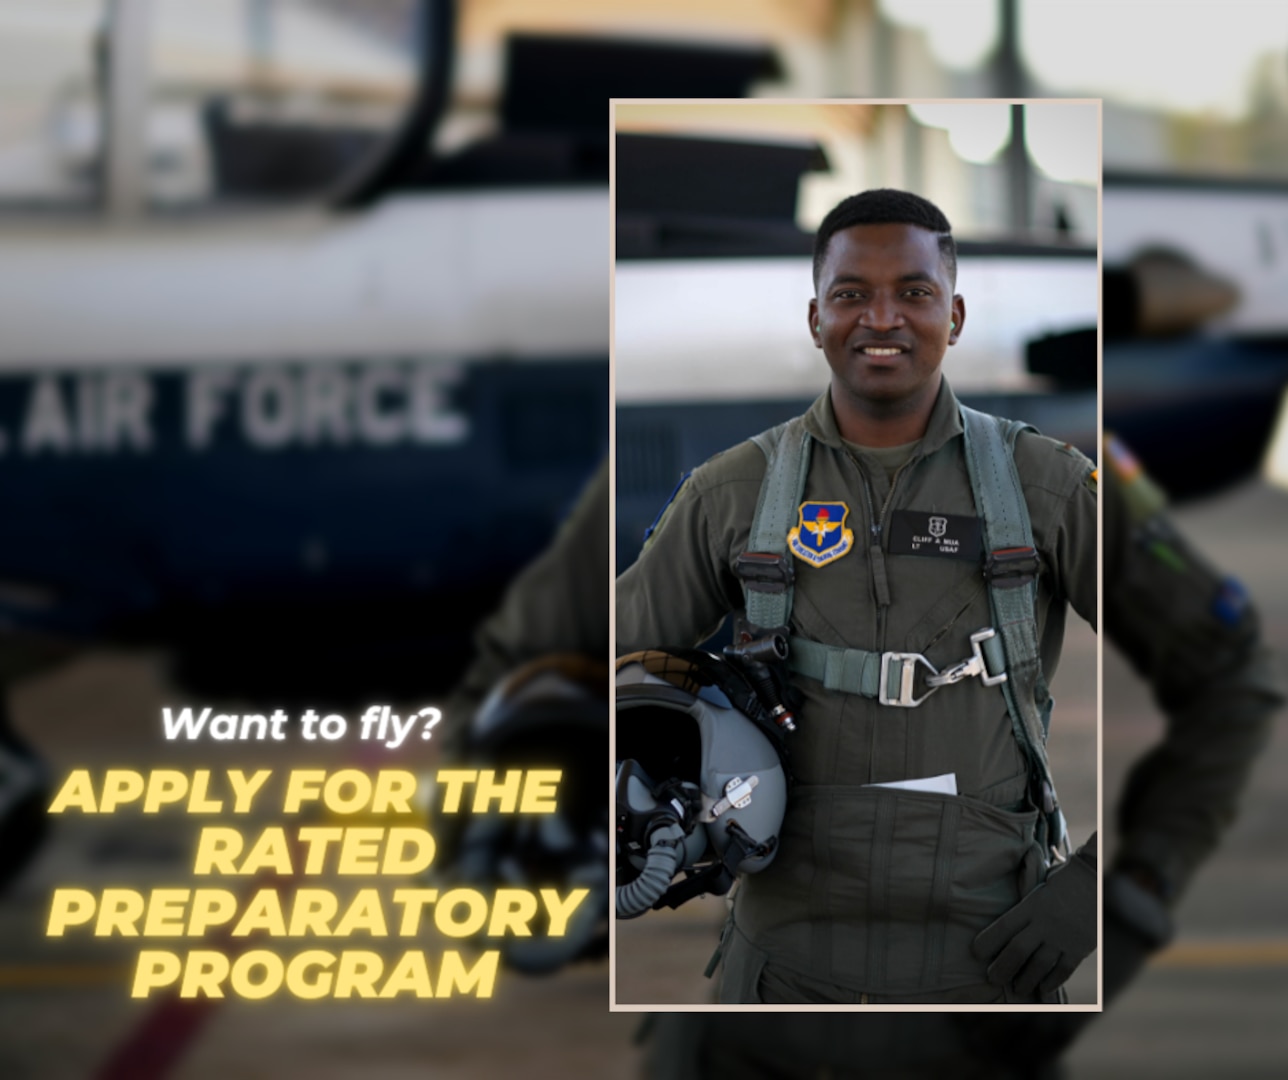 Interested in flying in Air Force, but have little to no experience